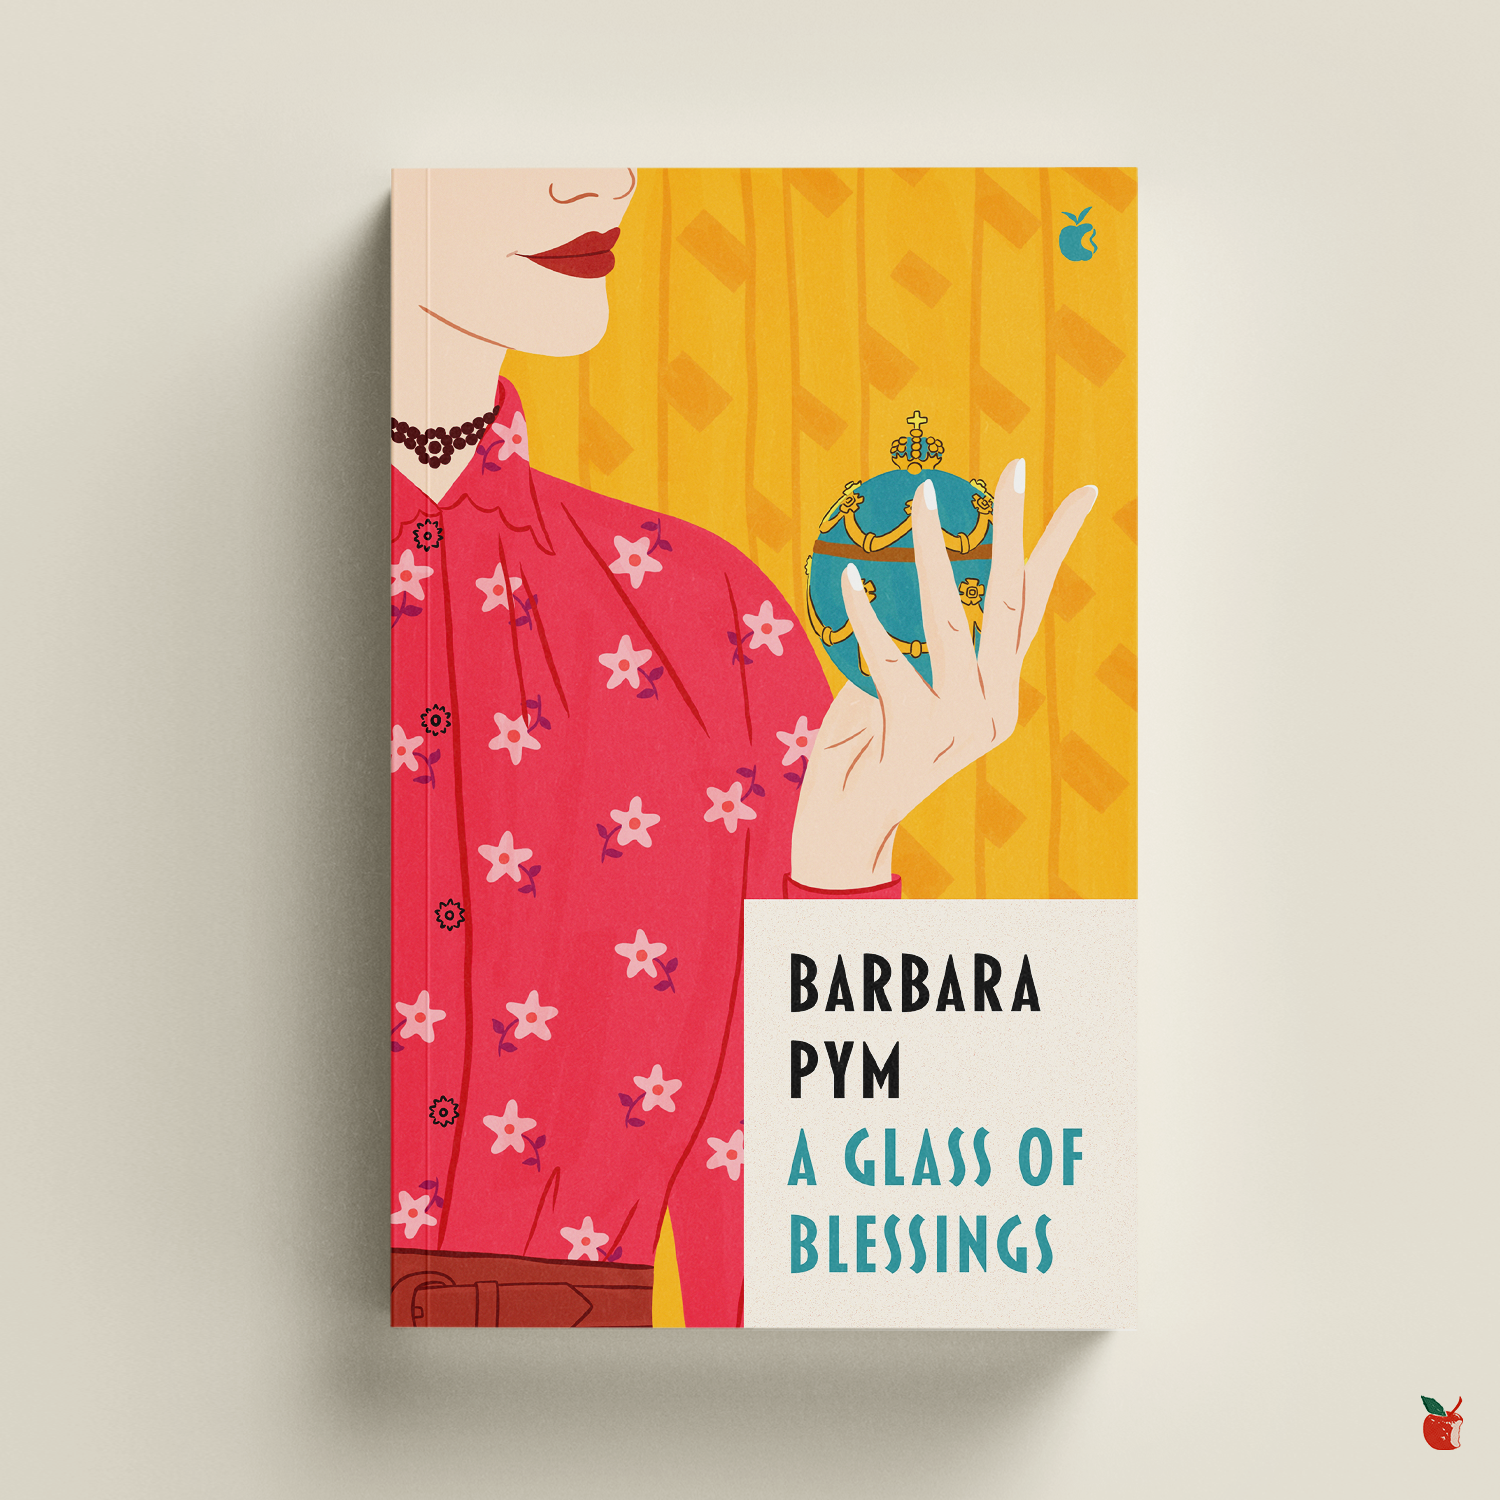 A Glass of Blessings by Barbara Pym